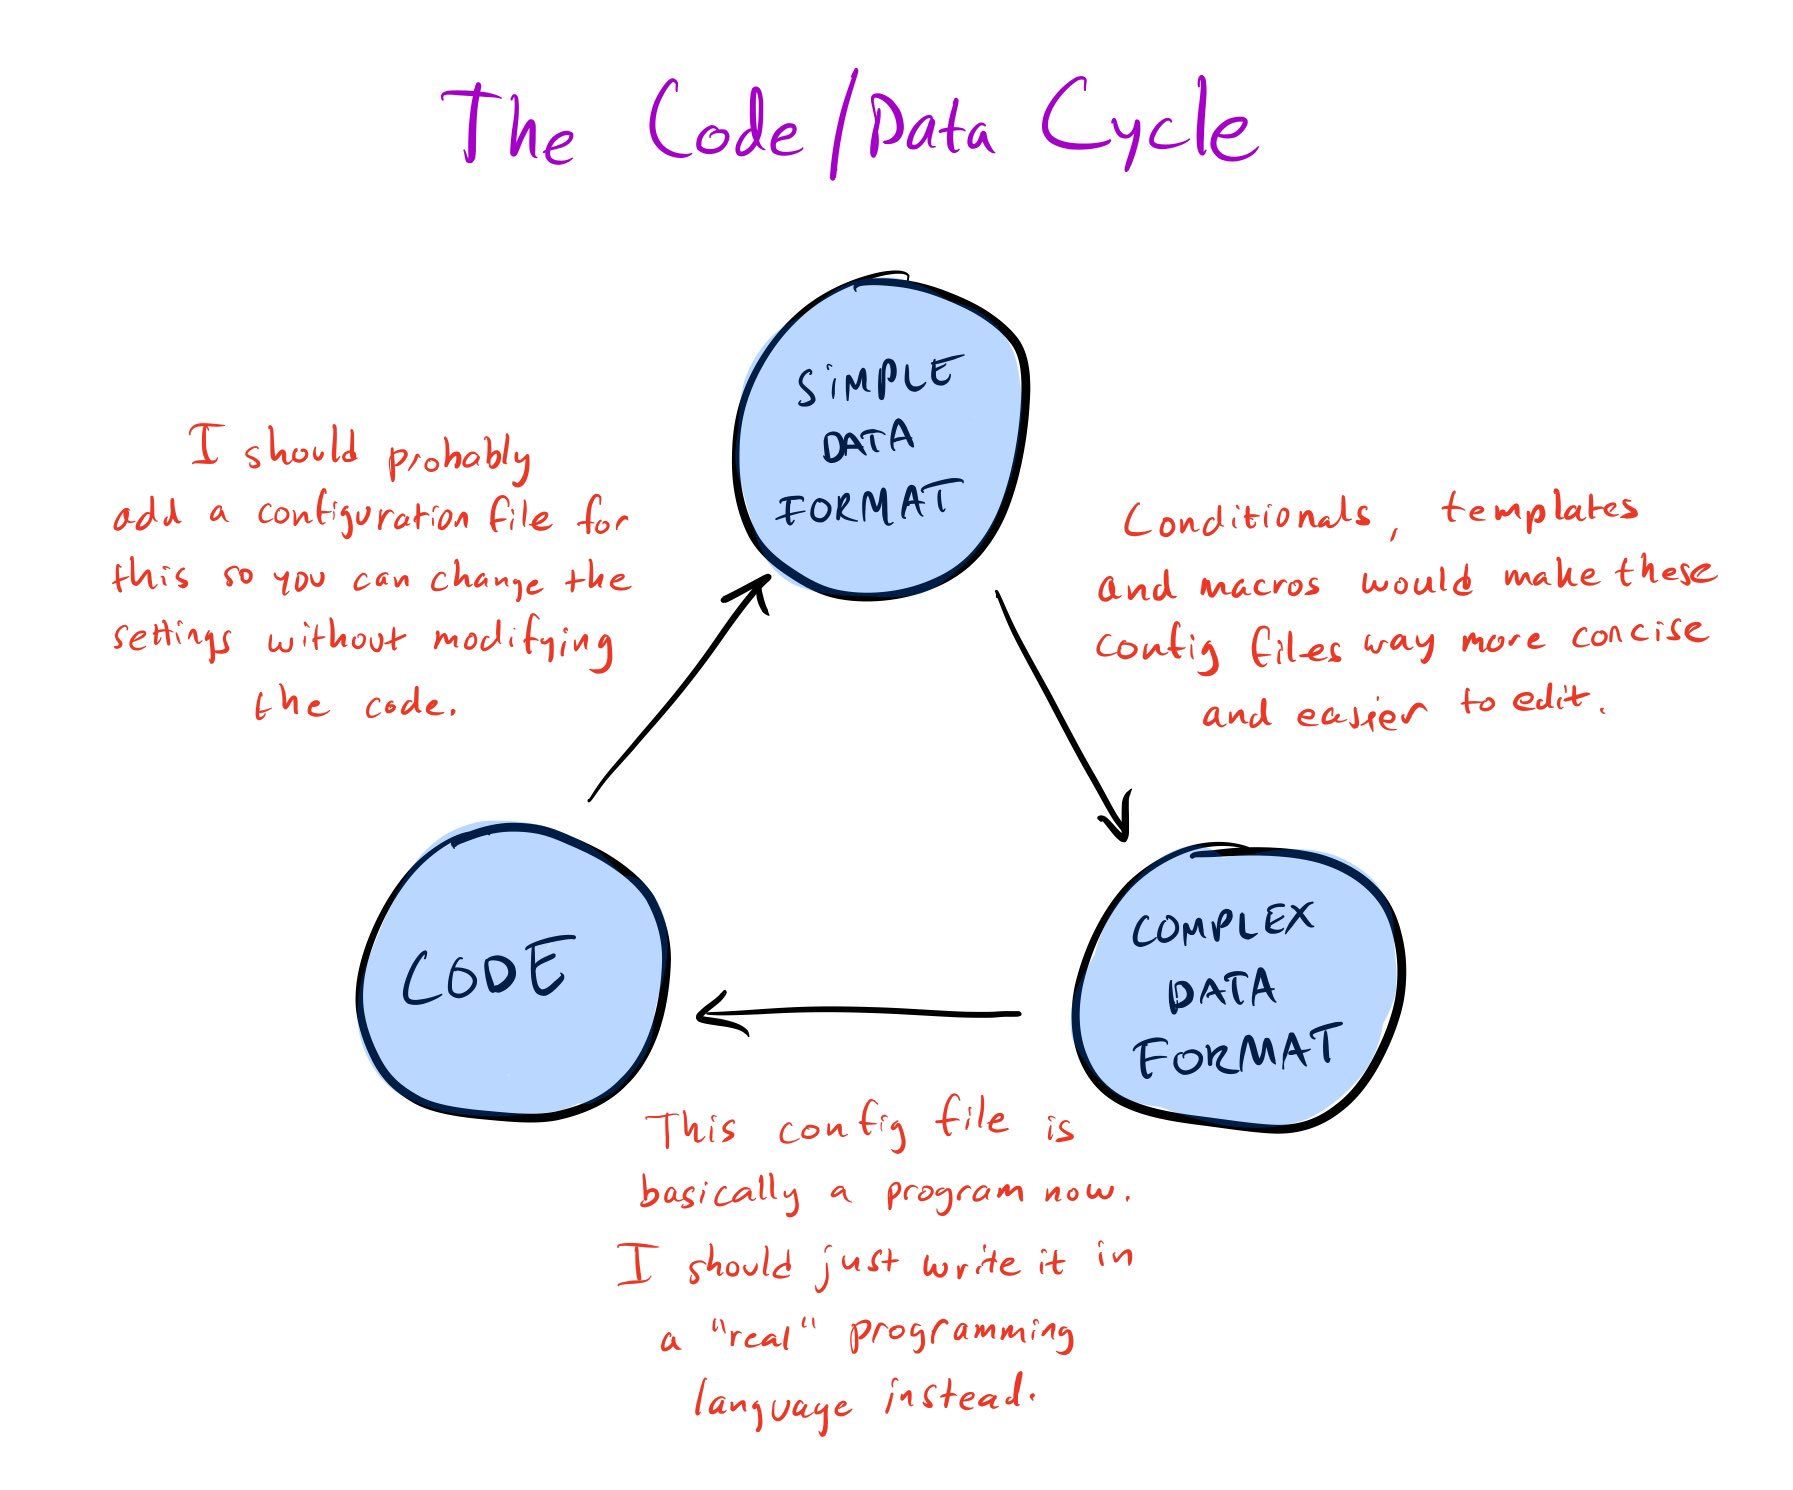 The Code/Data Cycle.